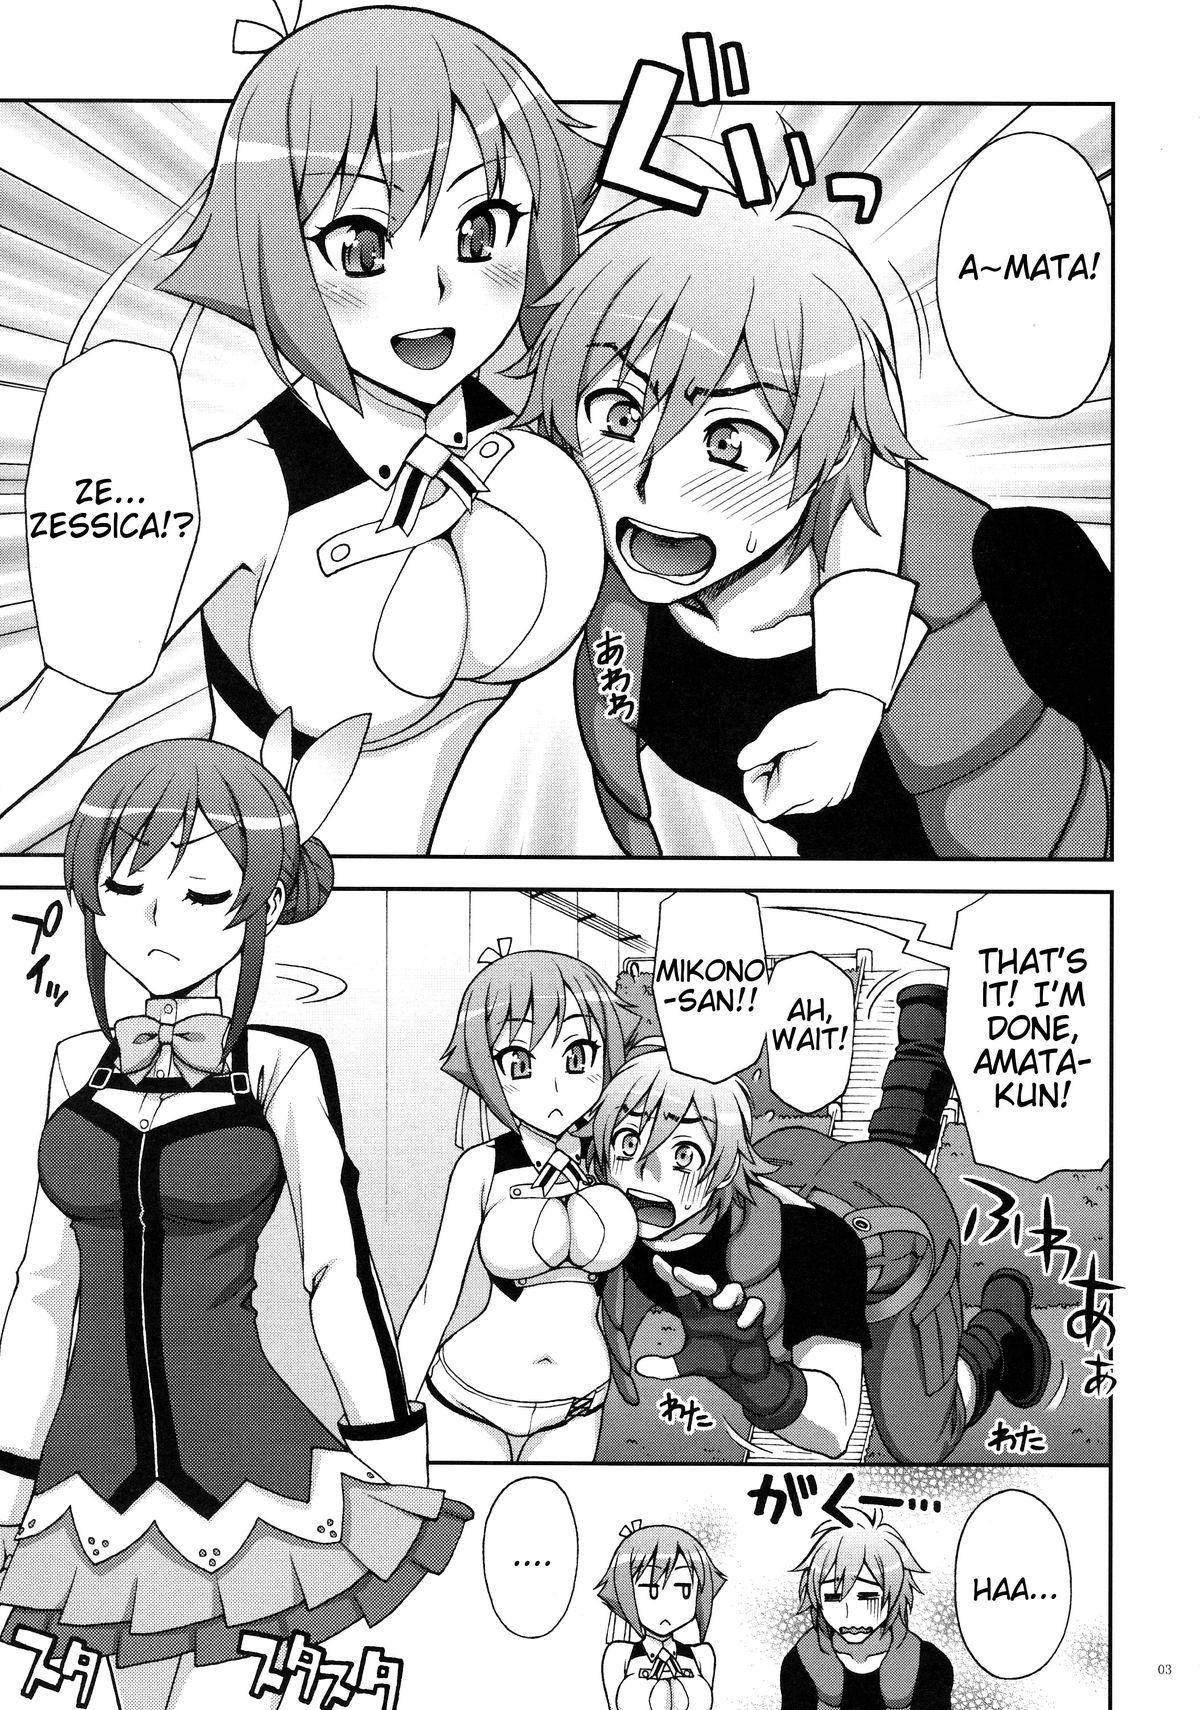 Teen Hardcore For The First Time - Aquarion evol Tranny - Page 2